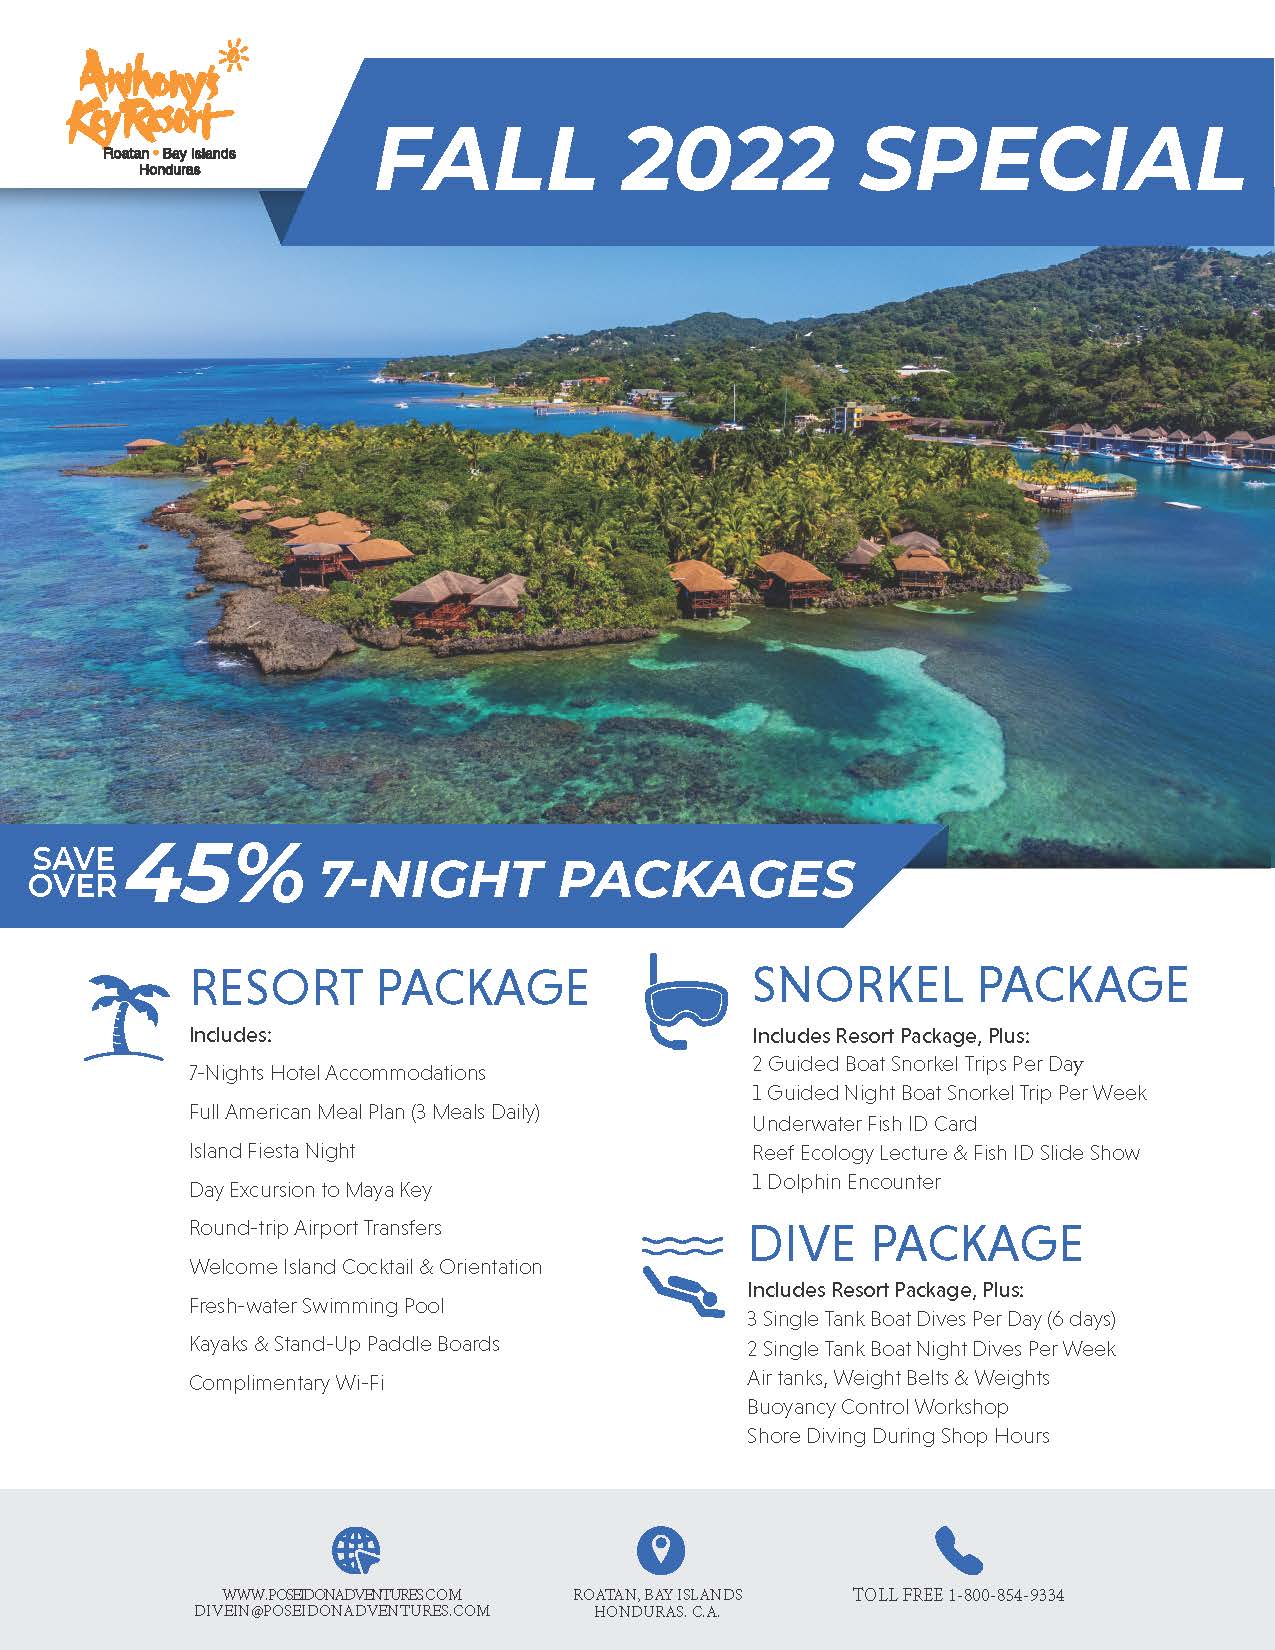 2022 Anthony's Key - Fall Special 7-Night Packages